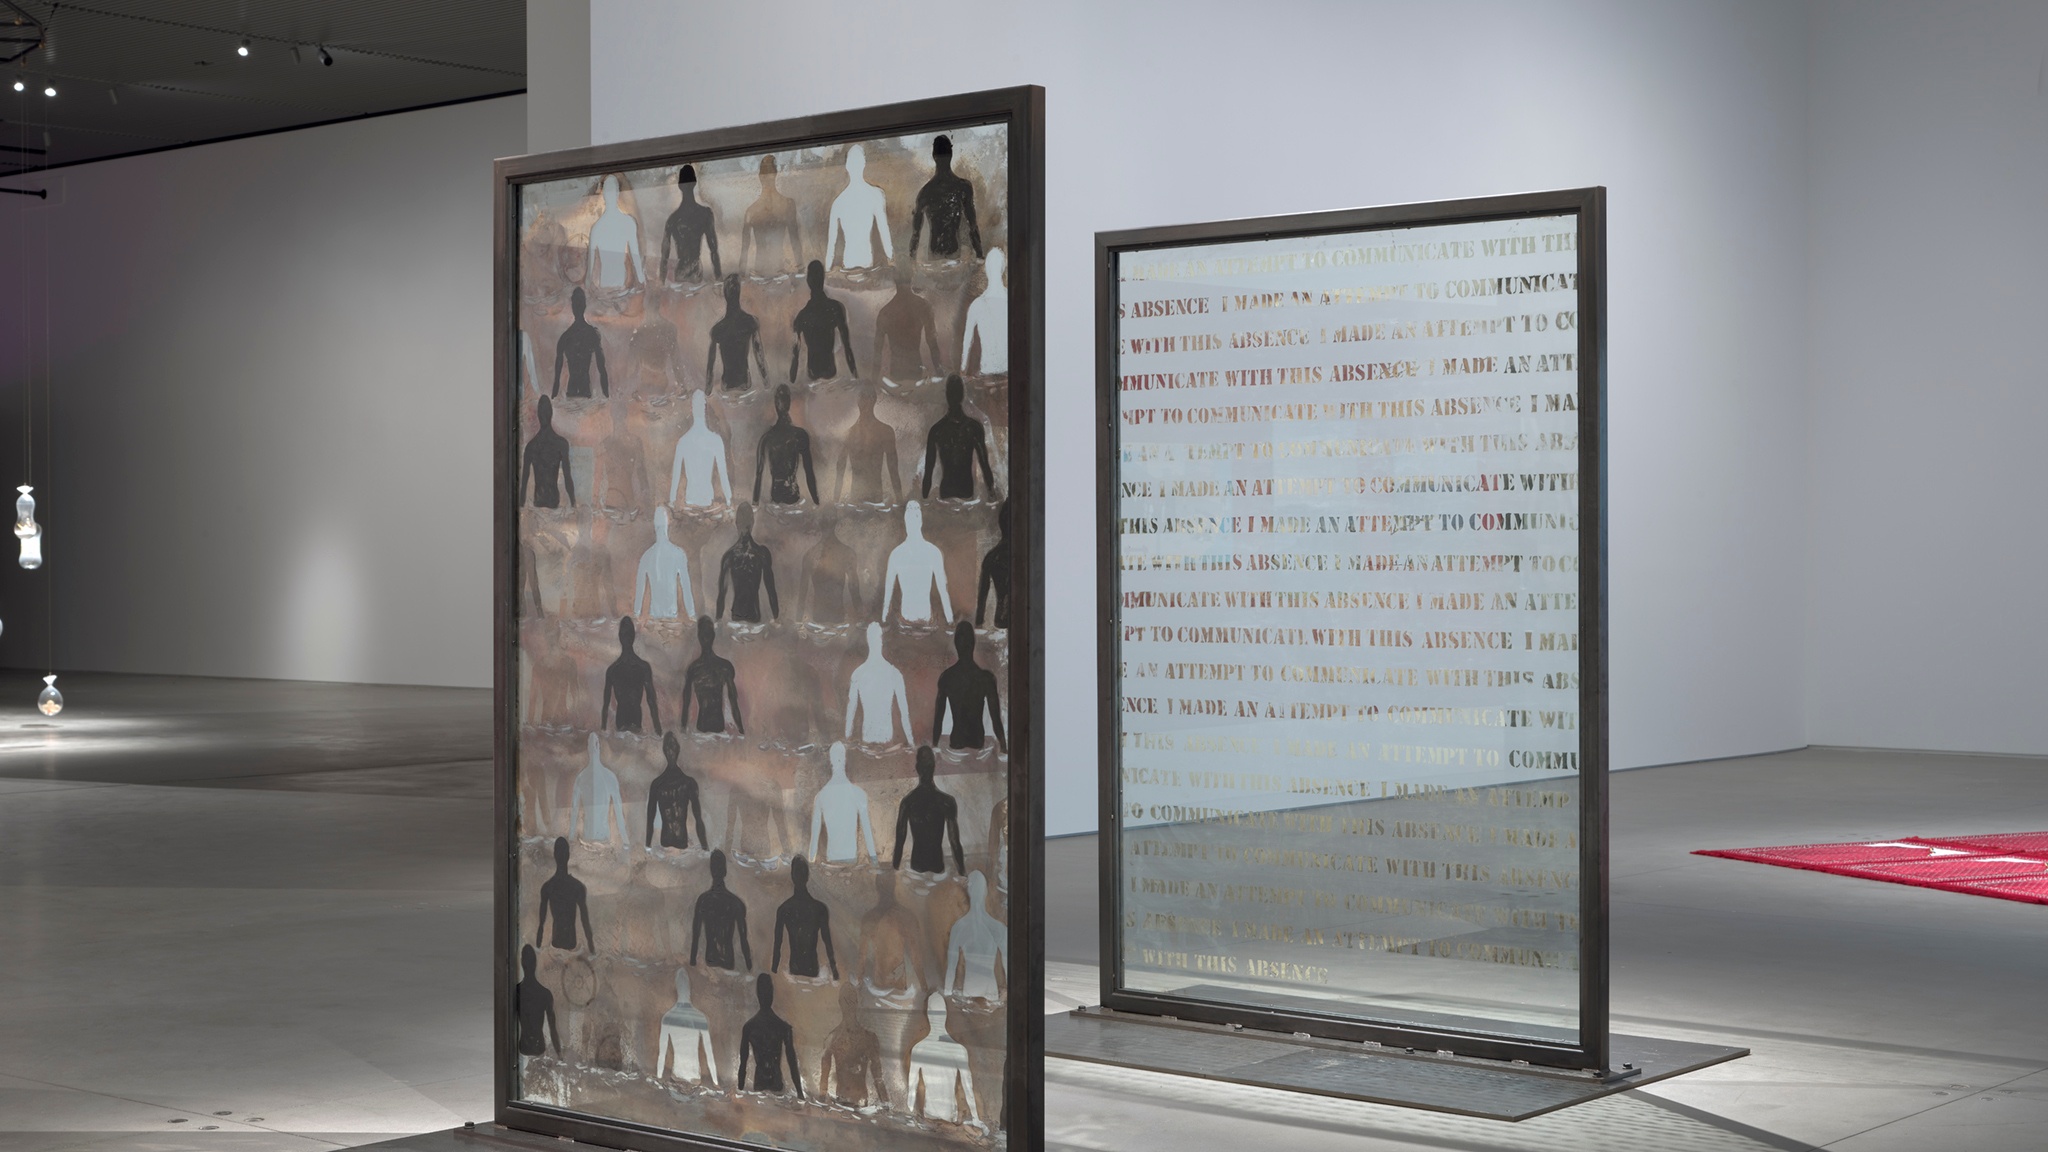 Two glass panels standing upright in a gallery. One has the form of a person from the waist up stenciled in a repeating pattern of mirrored, painted, and transparent glass. The other repeats the sentence "I made an attempt to communicate with this absence.”